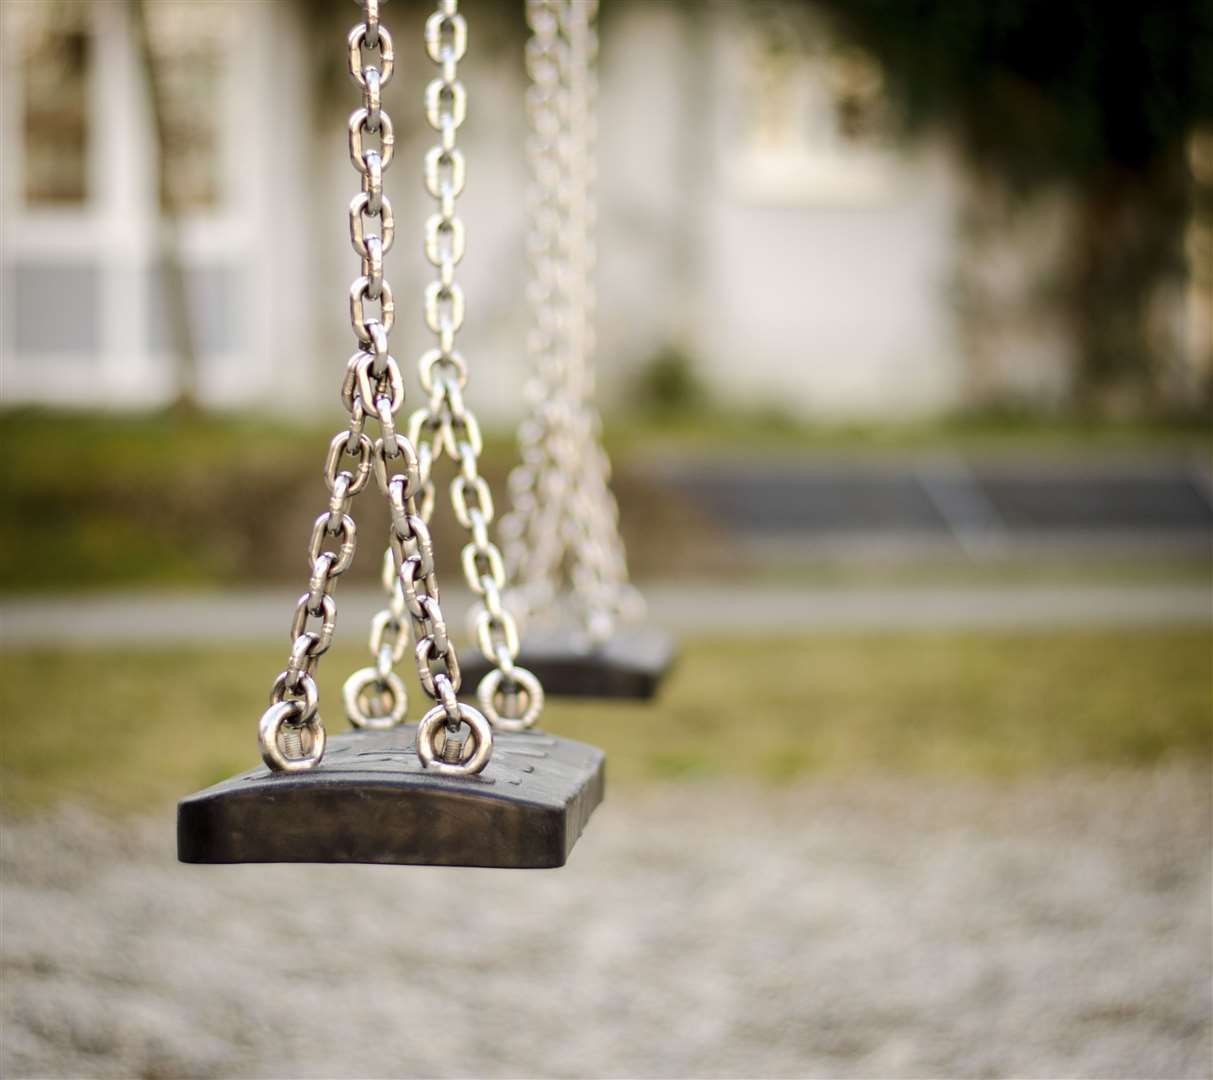 The teenager was robbed at a recreation ground Picture: iStock